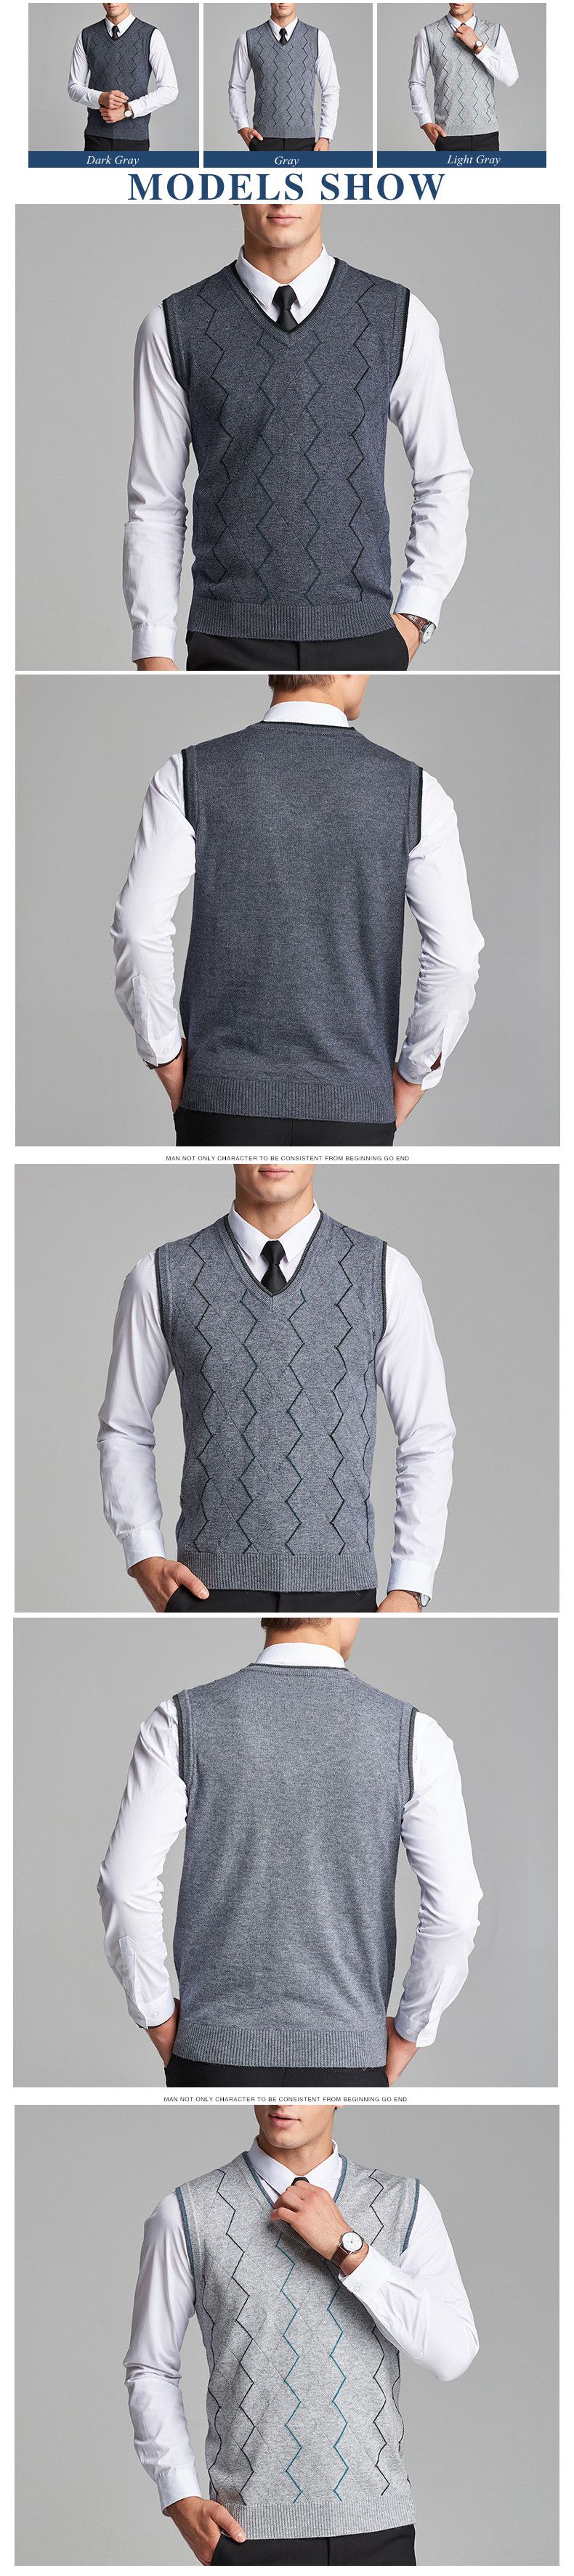 Fashion-Striped-Woolen-Pullover-Vests-Casual-Business-Mens-V-neck--Sleeveless-Sweaters-Vest-1193367